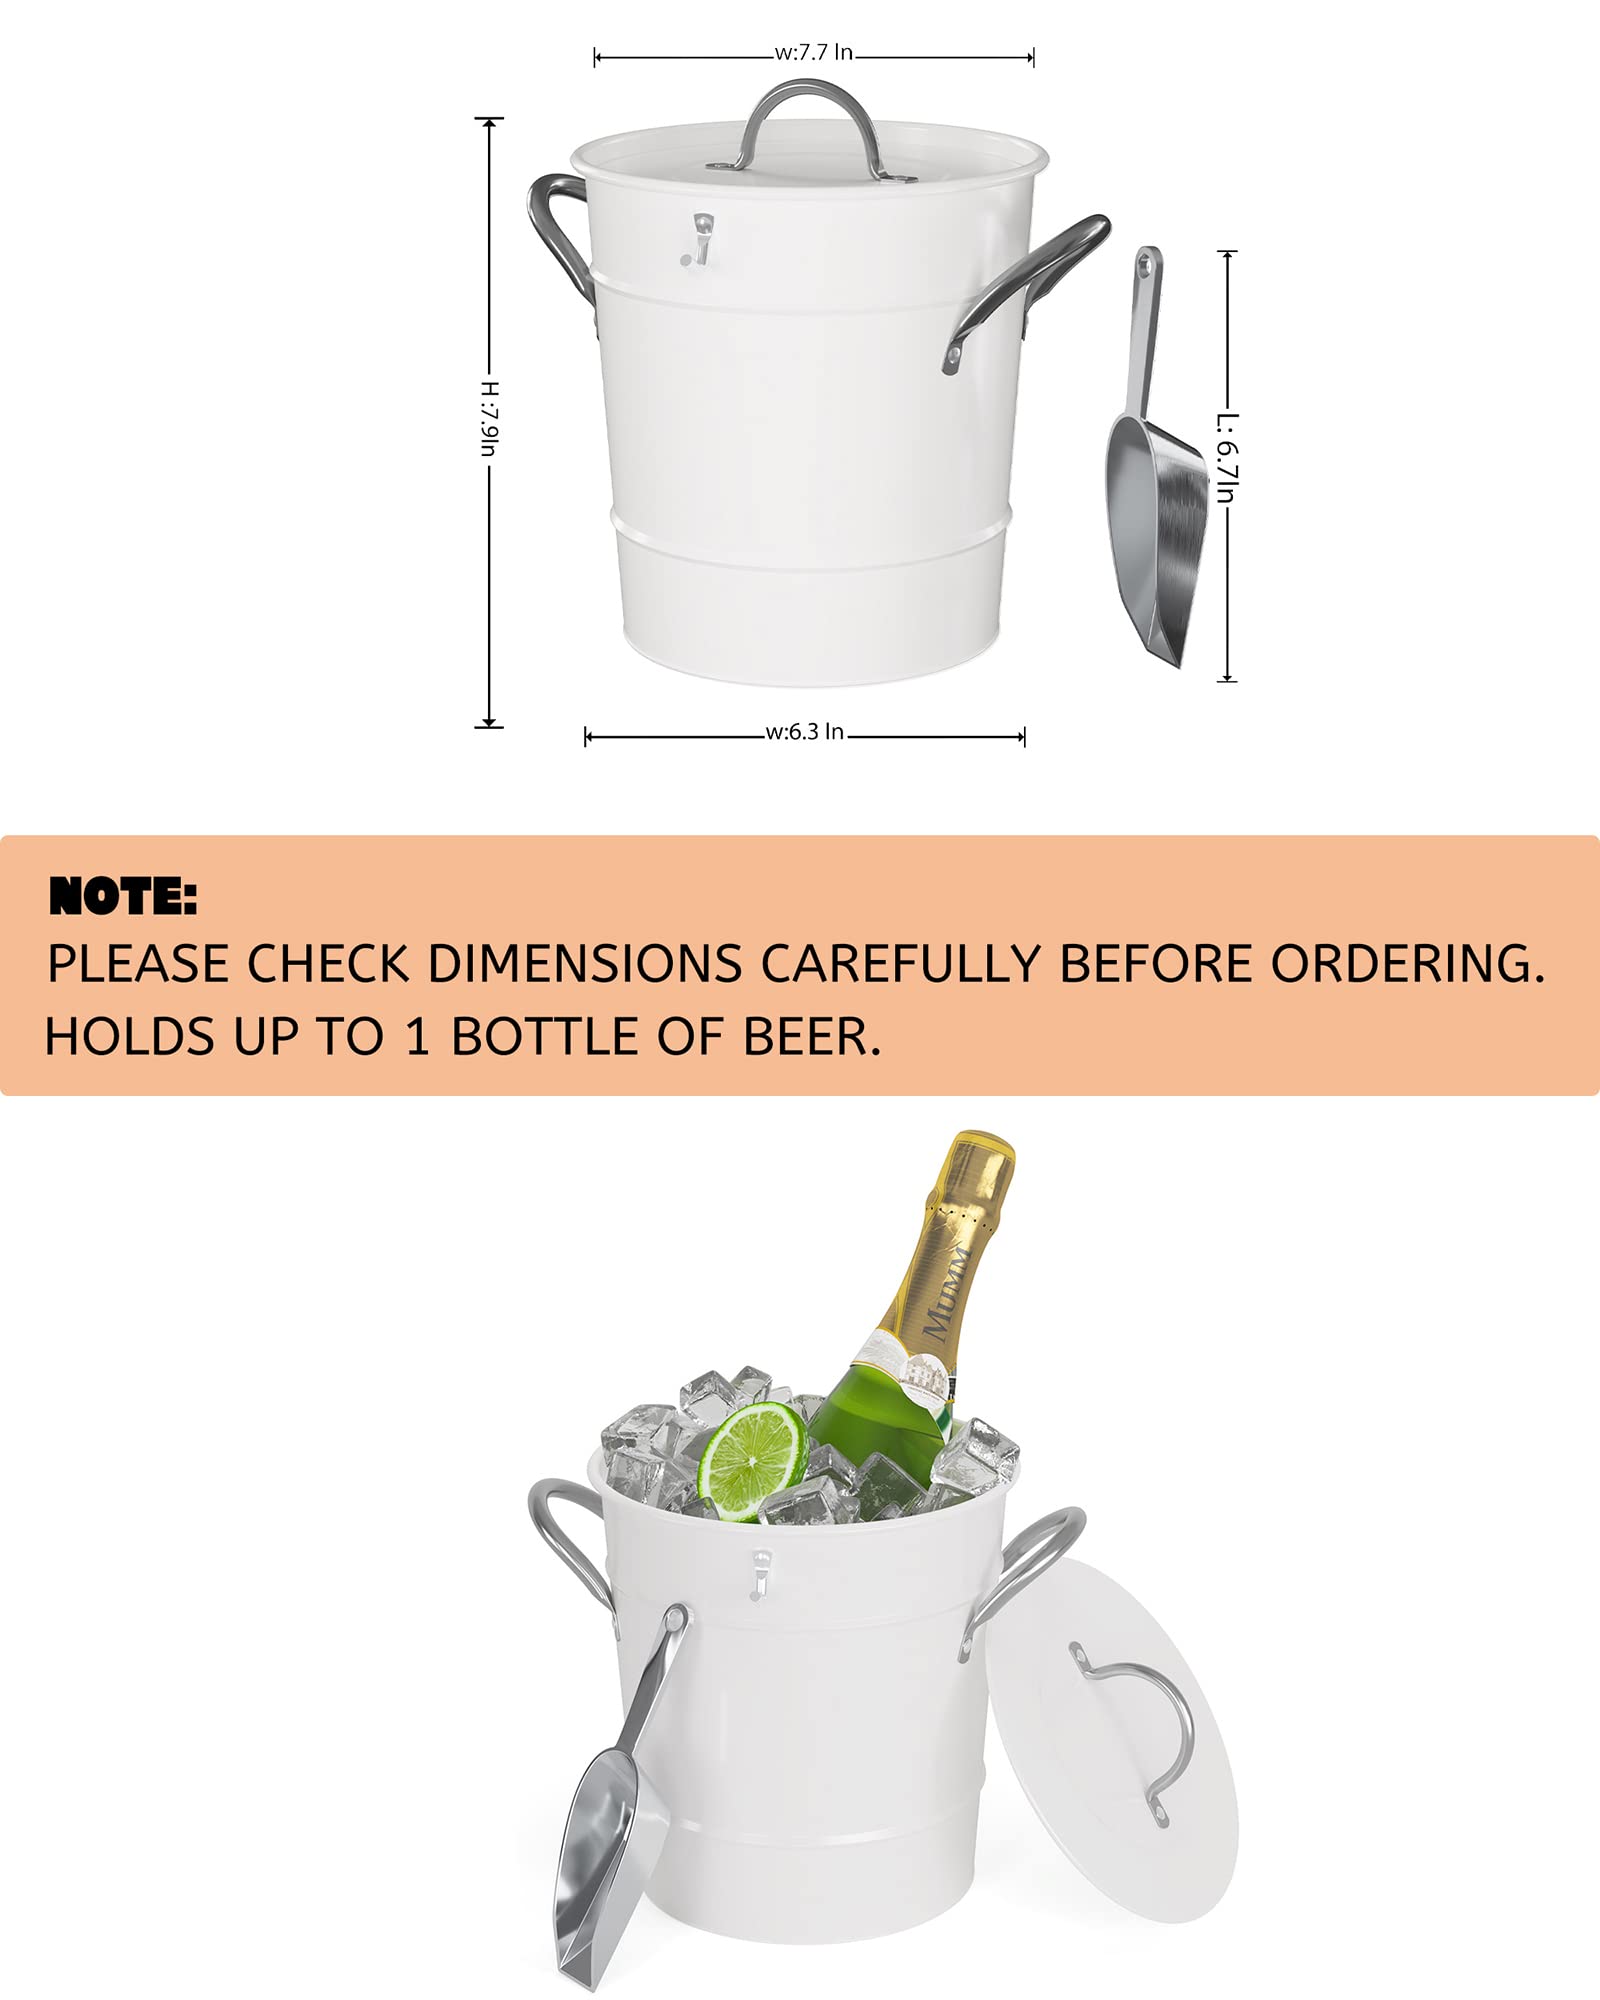 LF Likefair Double Wall Ice Bucket with Lid and Spade,4.2Quart/4Liter Galvanized Ice Buckets for Beer,Ice,Wine,Champagne,Parties,Outdoor,Picnic,Bar (Cream White)